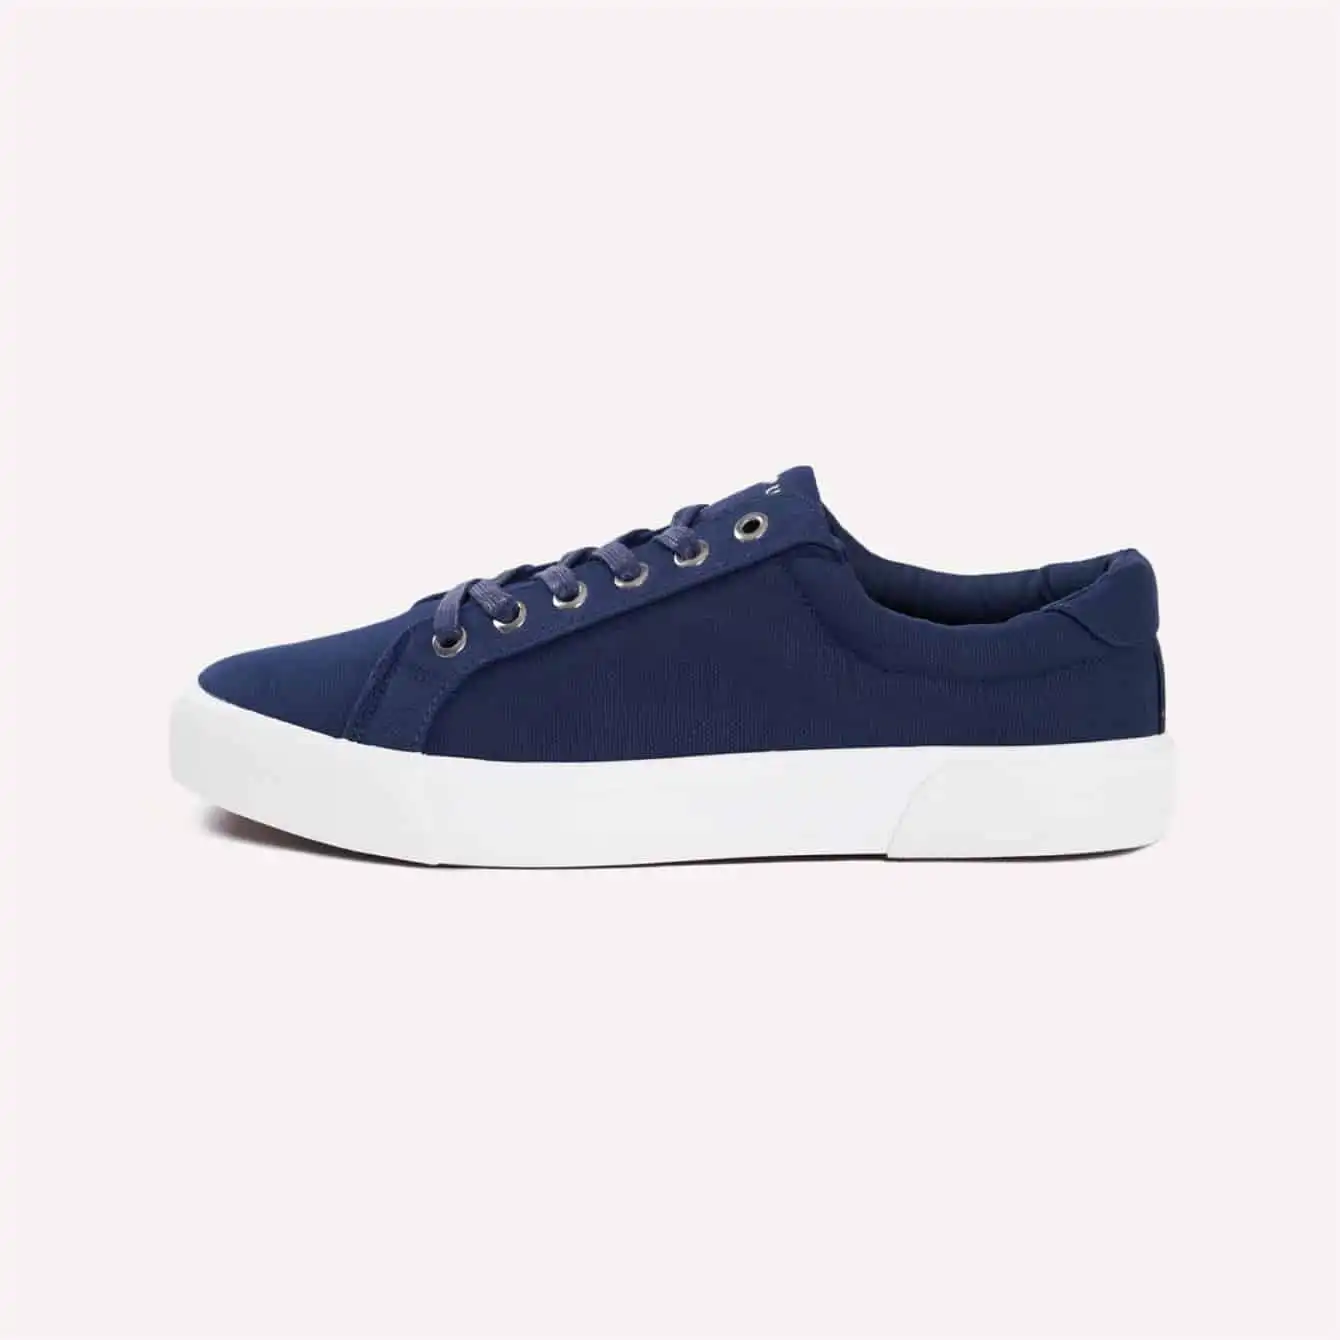 New Republic - Bowery Canvas Sneakers